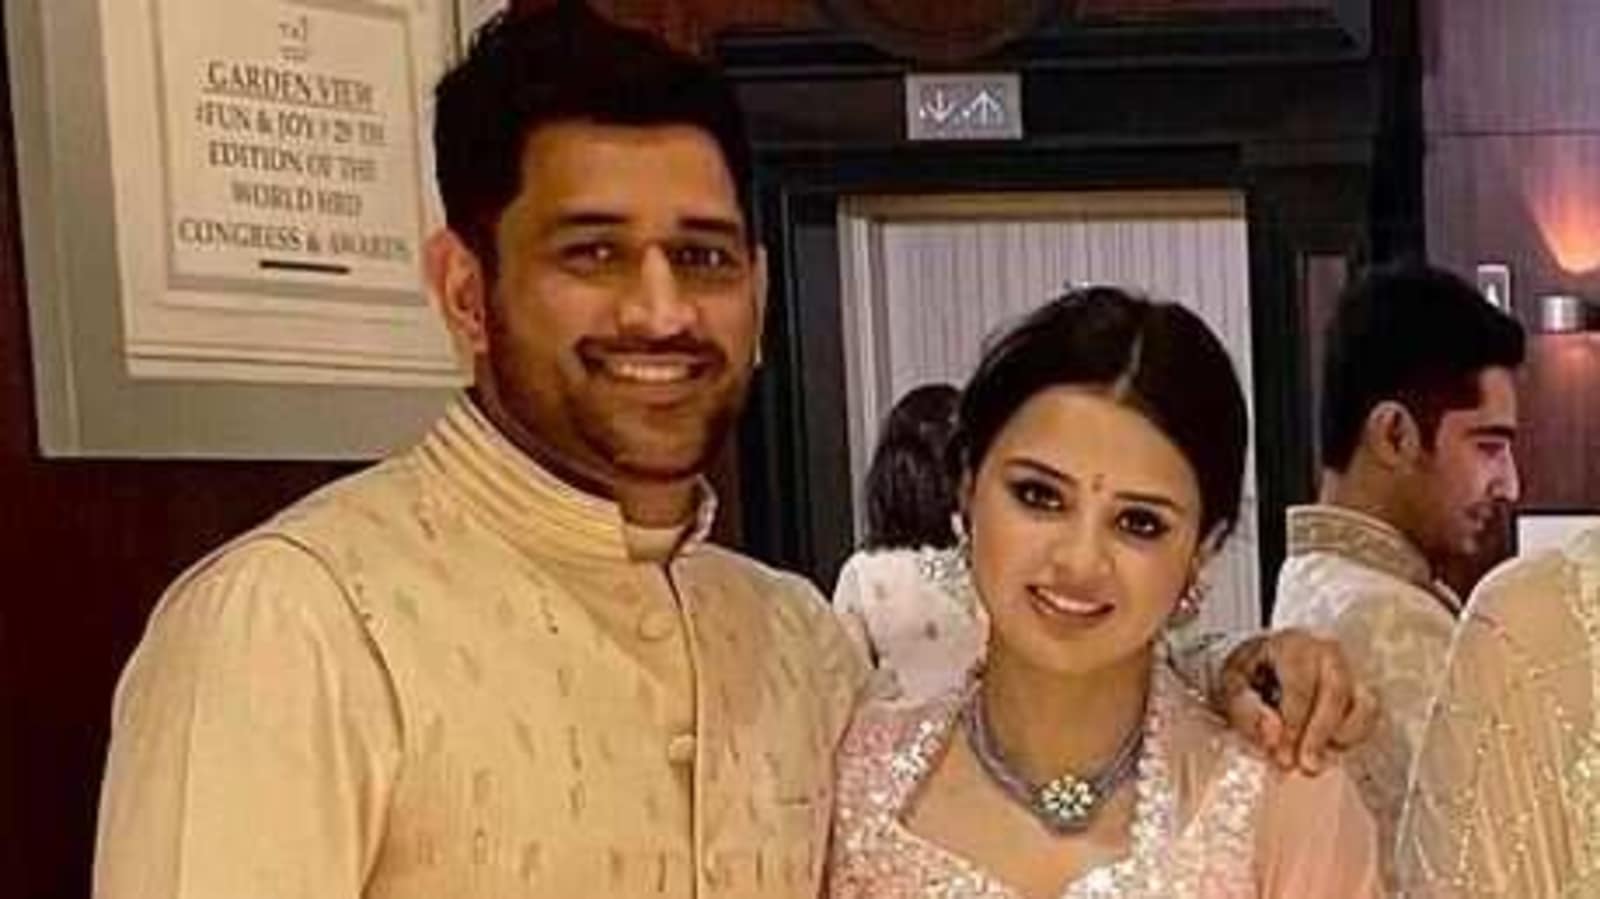 MS Dhoni looks dapper in kurta, matches with wife Sakshi's dazzling pink  lehenga | Fashion Trends - Hindustan Times